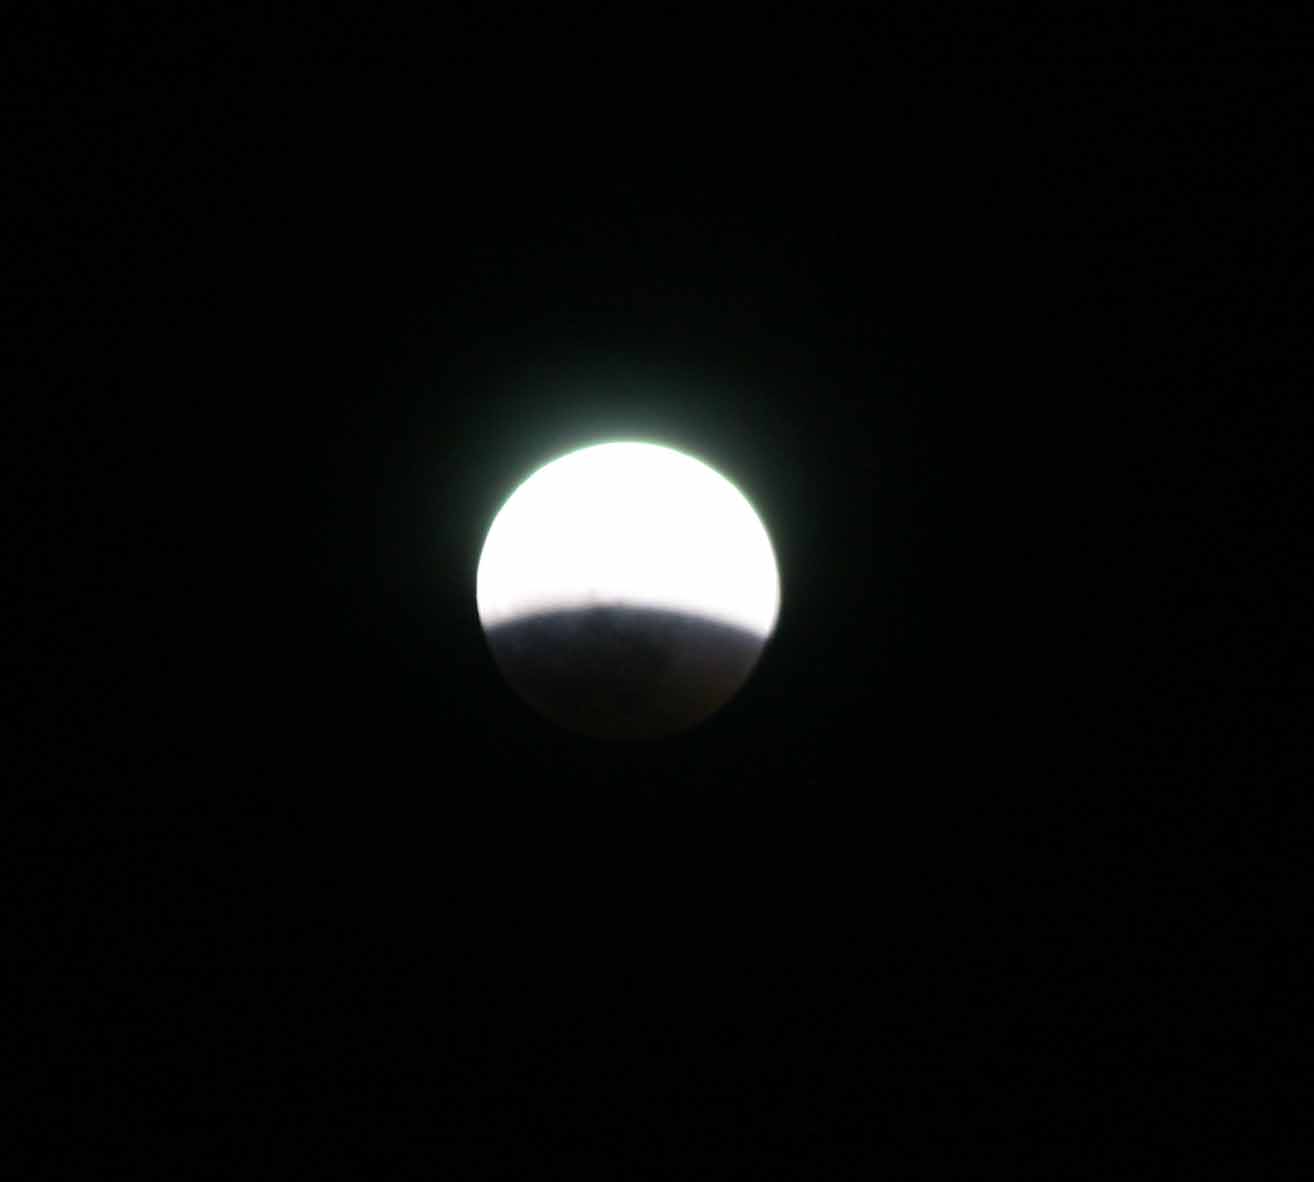 Nearly 1/3 eclipsed